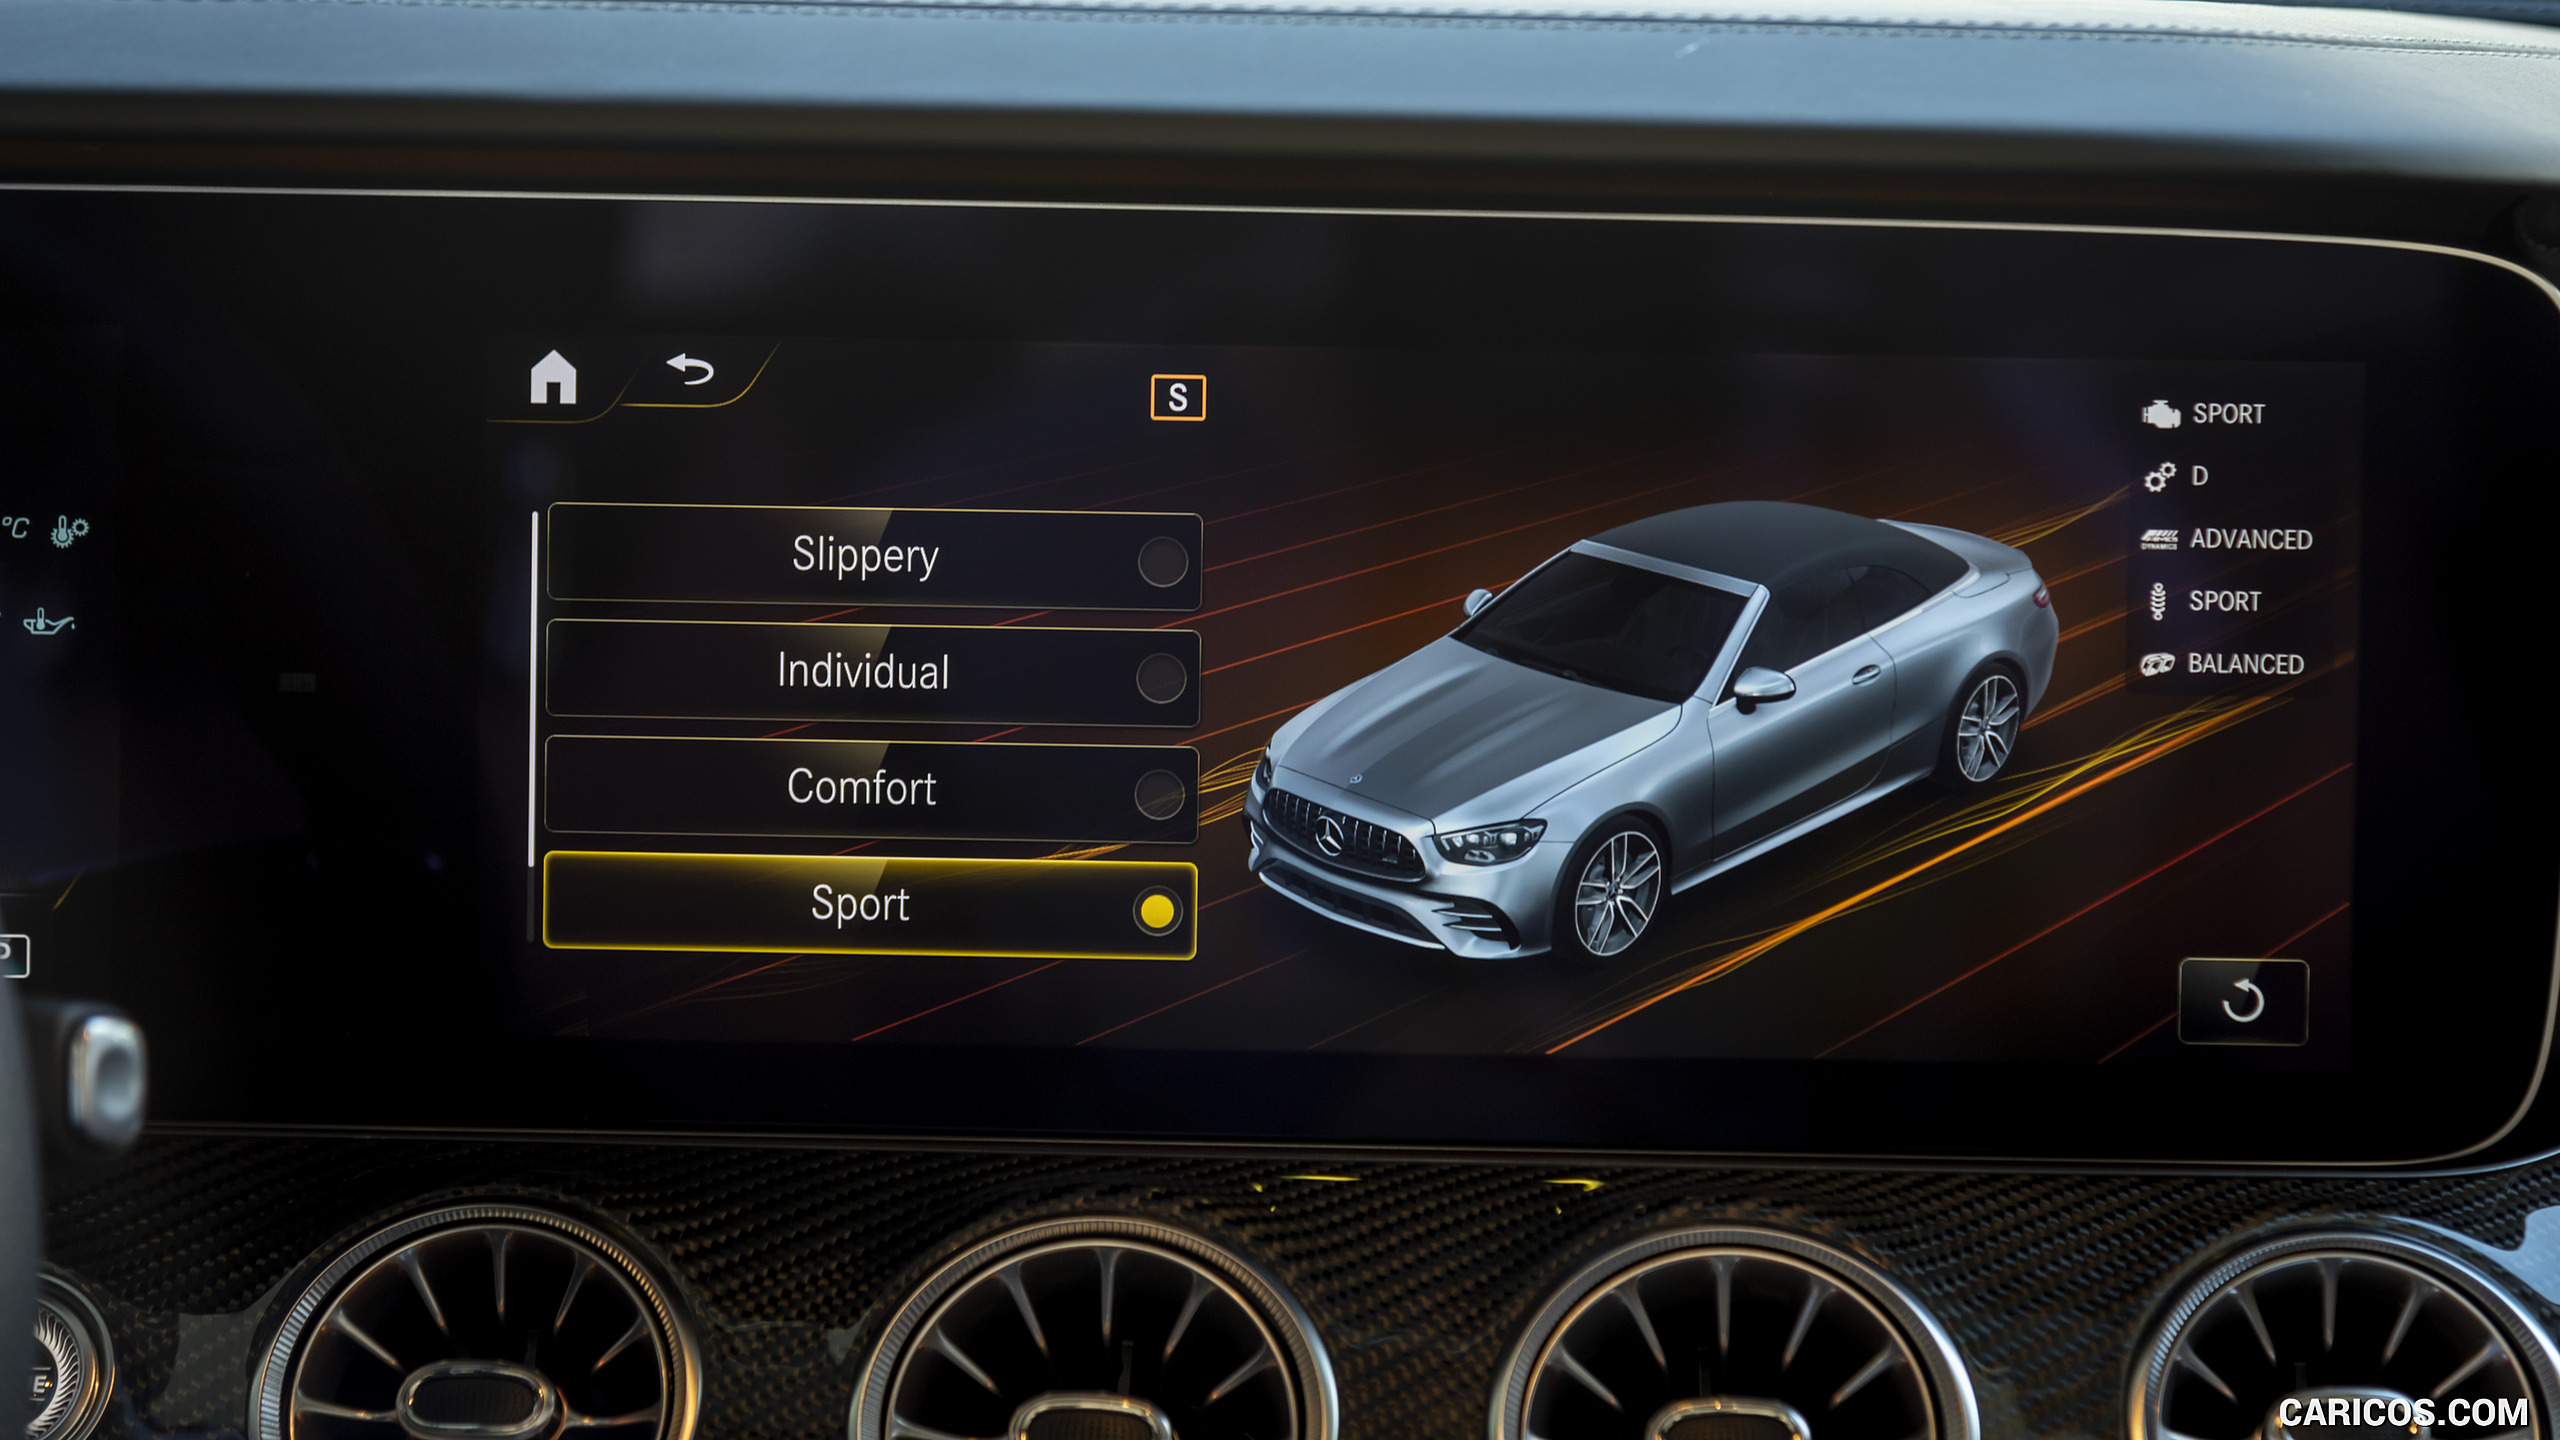 2021 Mercedes-AMG E 53 4MATIC+ Cabriolet - Central Console, #86 of 166